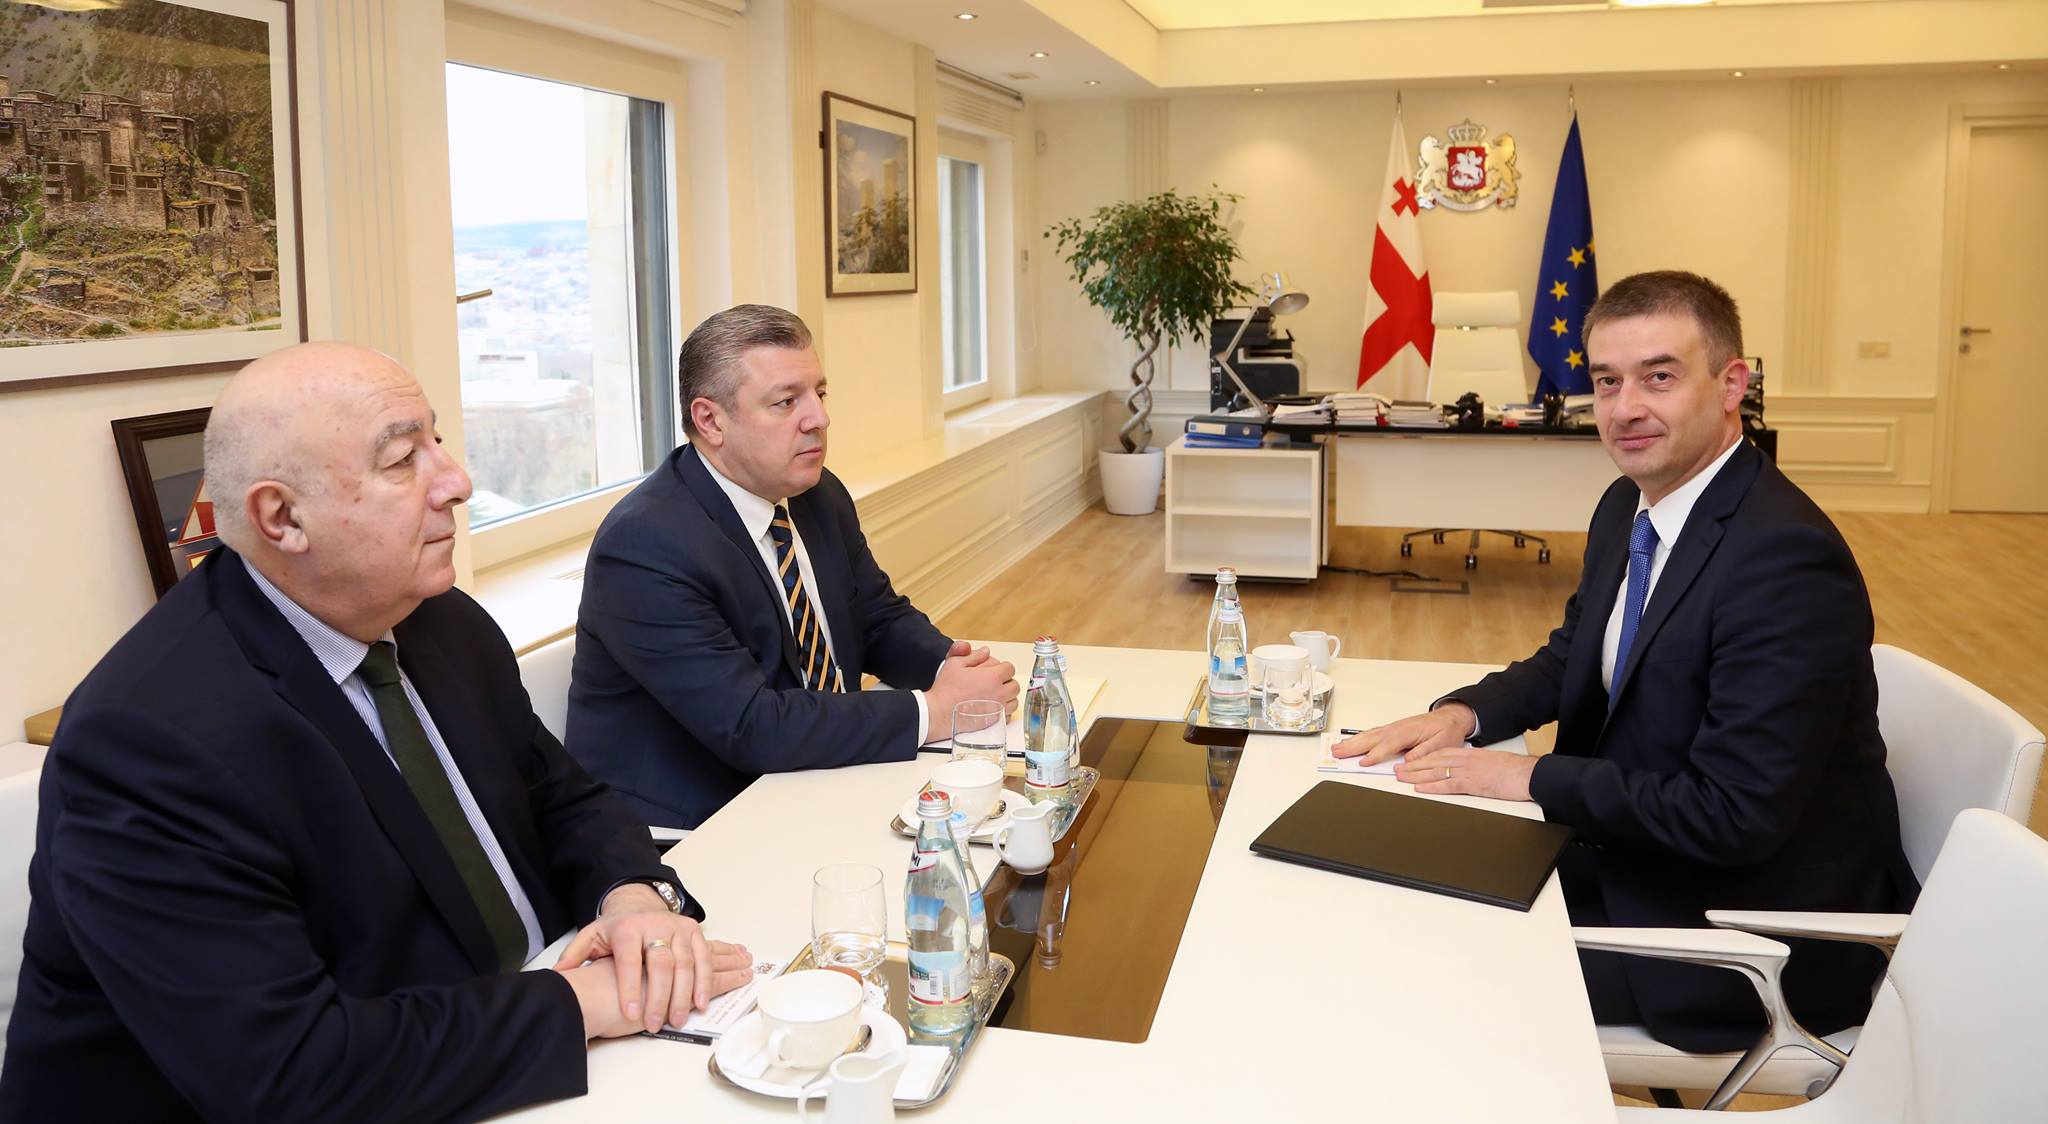 Prime Minister Meets Head of the Council of Europe Office